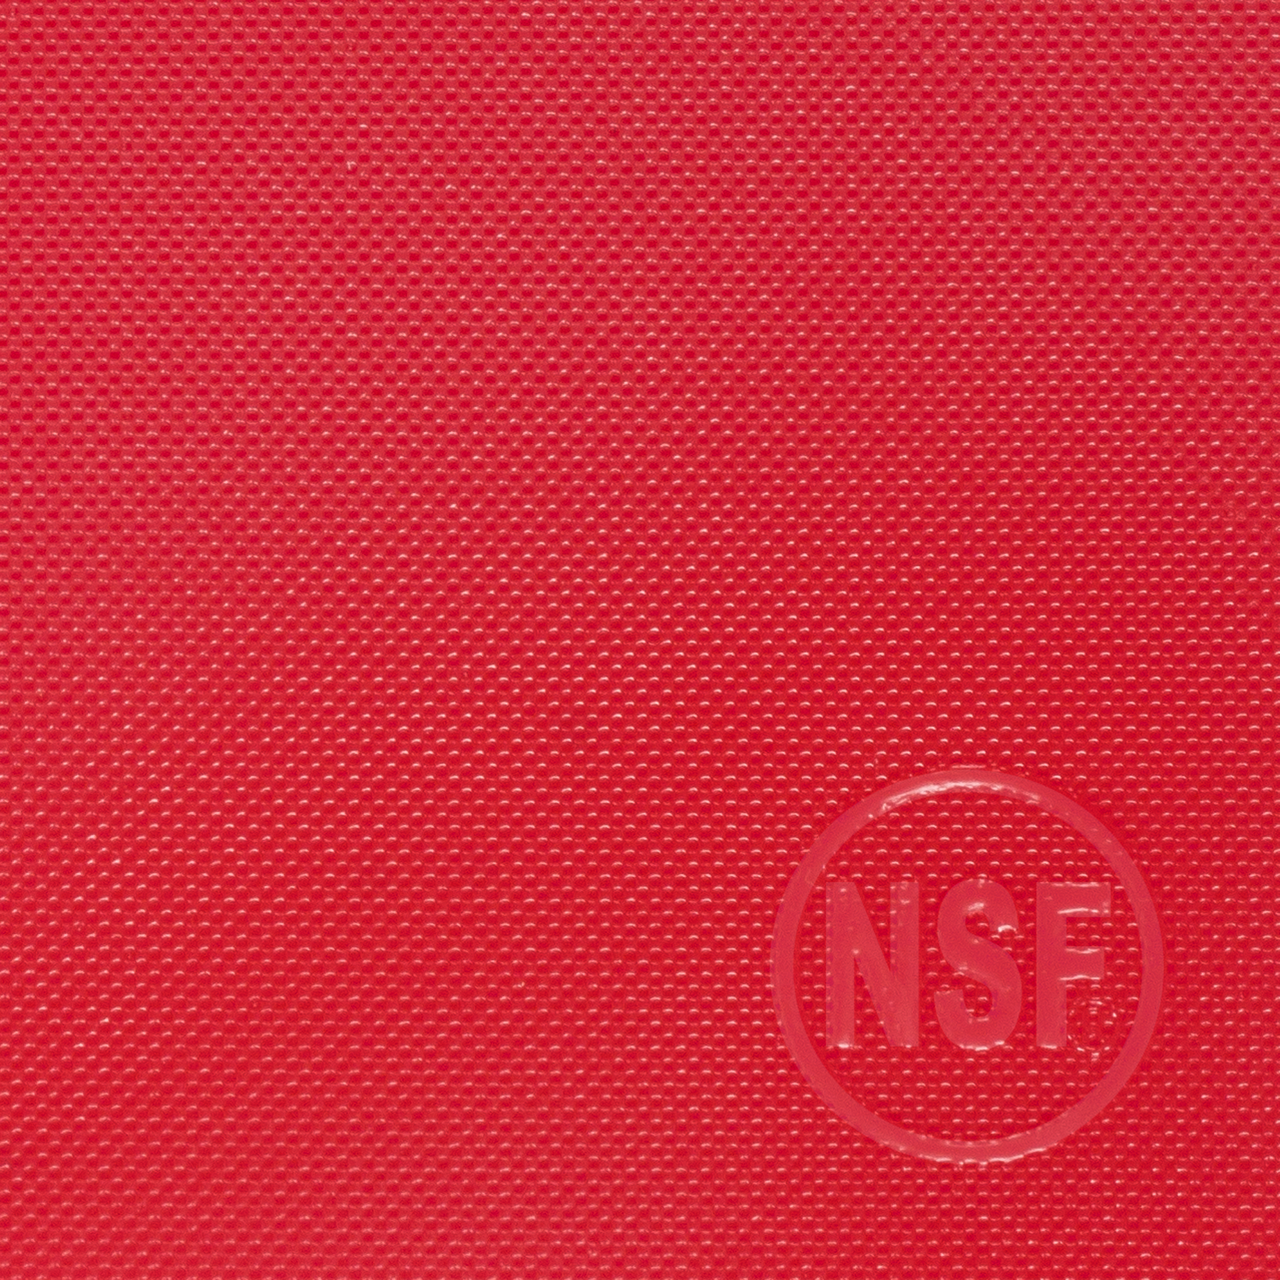 Commercial Red Plastic HDPE Cutting Board, NSF Certified - 18 x